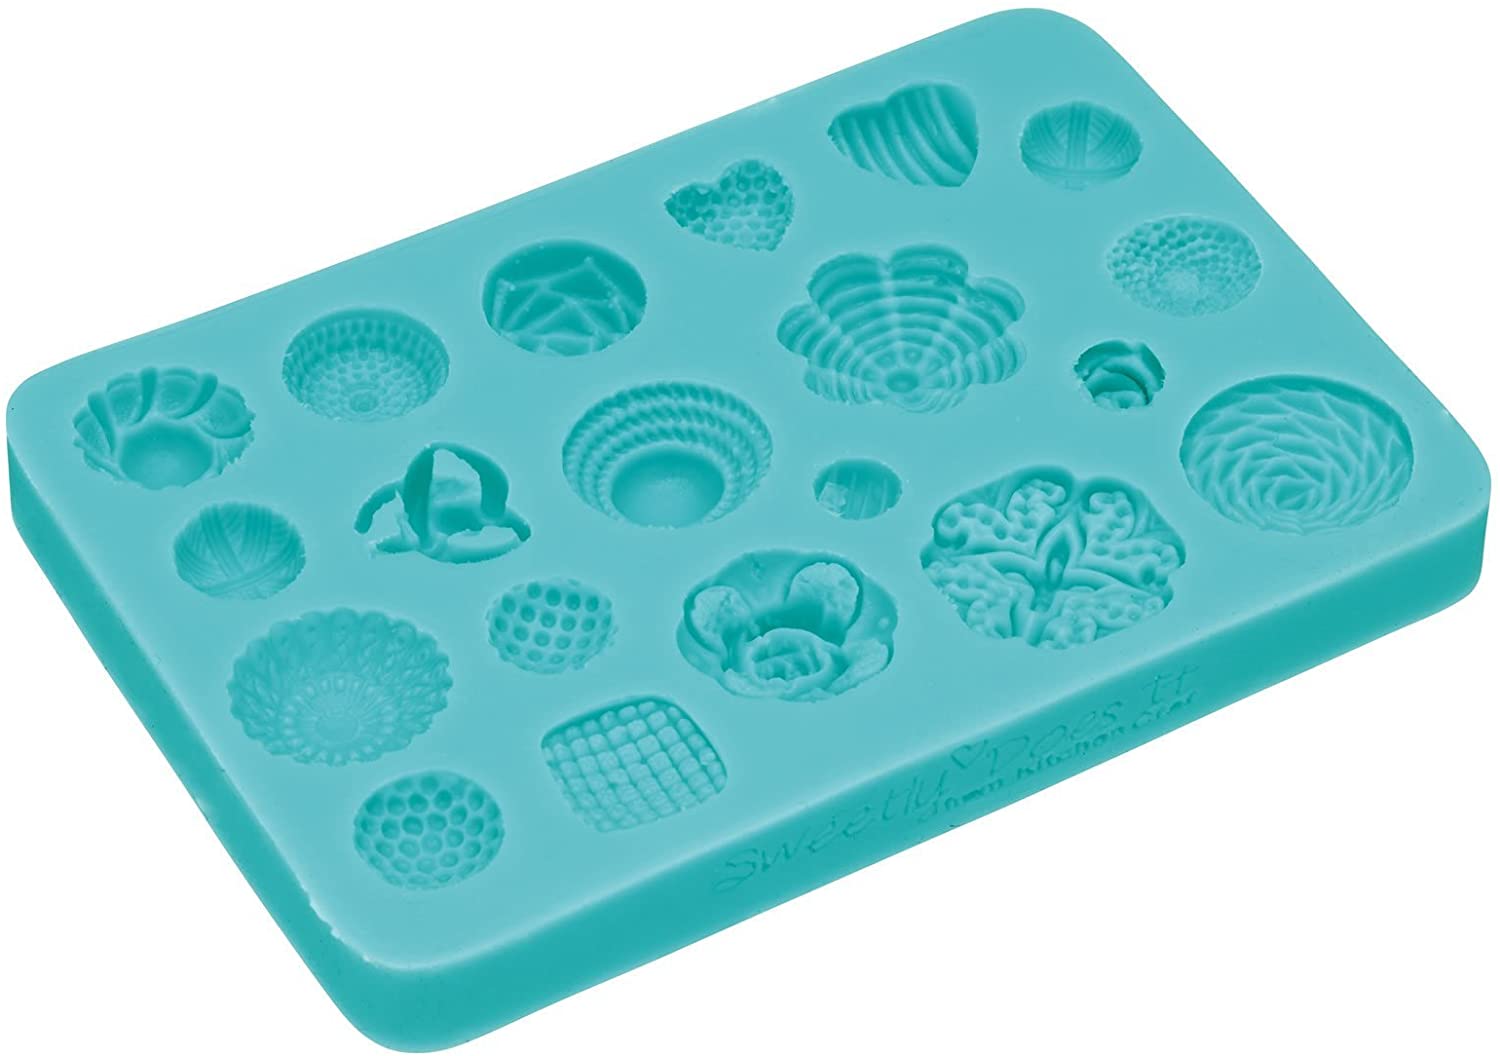 Kitchen Craft Sweetly Does It Rosettes Silicone Fondant Mould